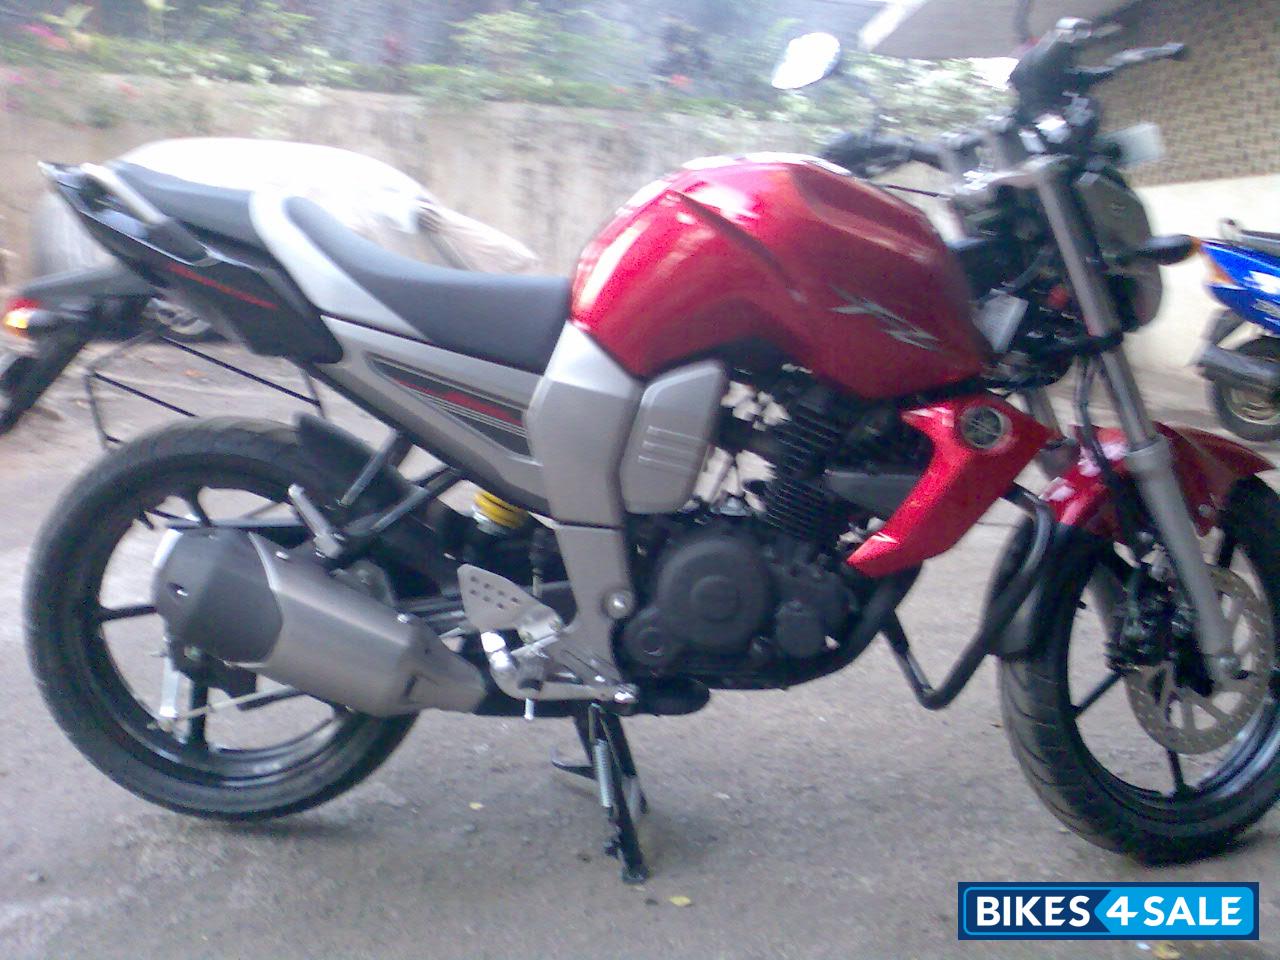 Used 2009 model Yamaha FZ16 for sale in Mumbai. ID 253809. Red colour ...